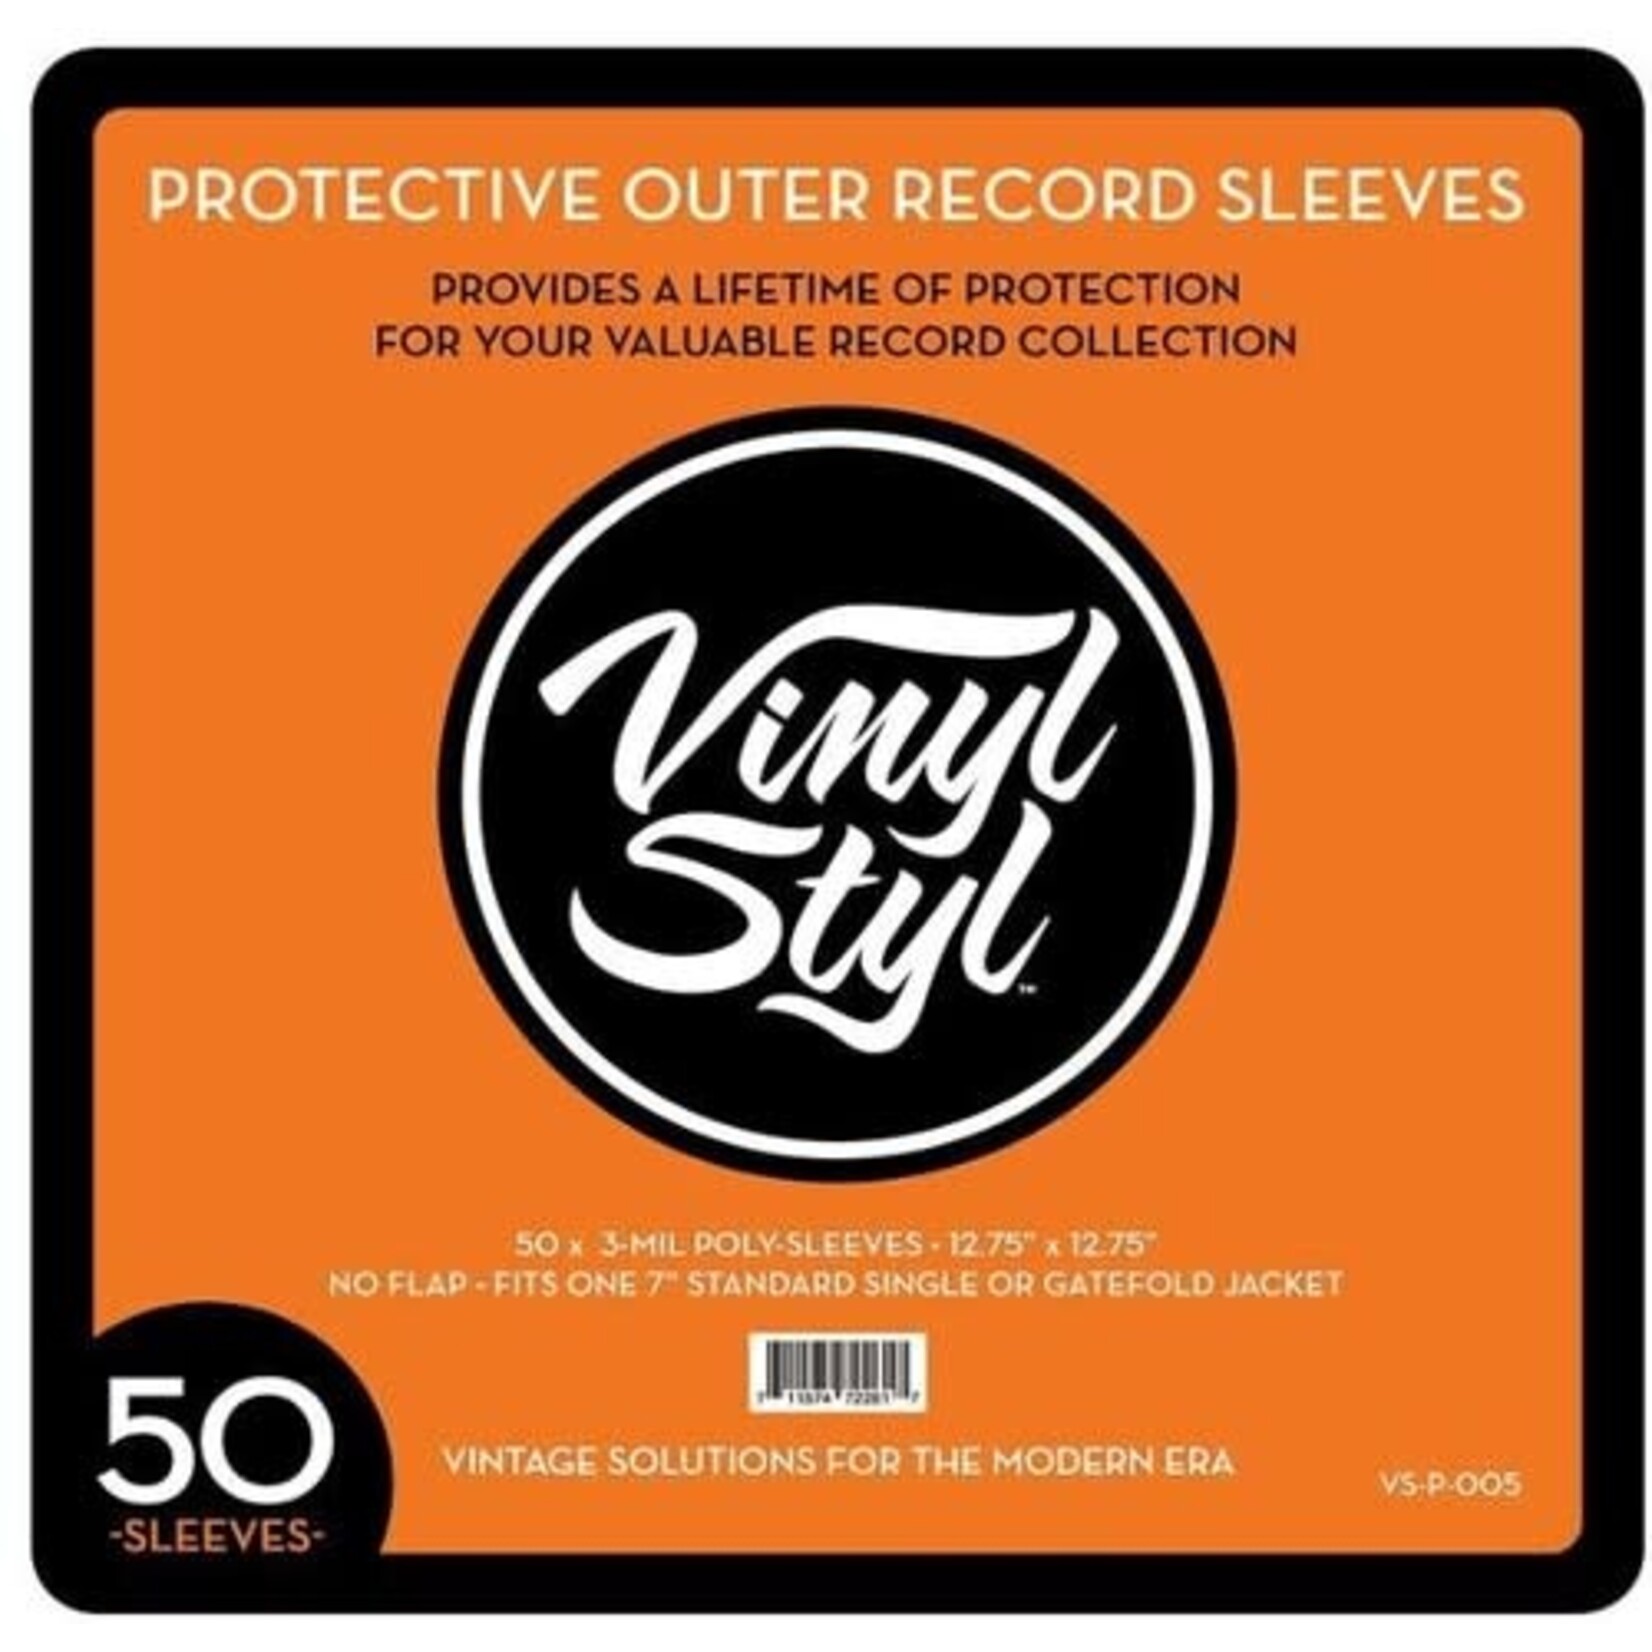 12" Protective Outer Record Sleeves - 50 Pack